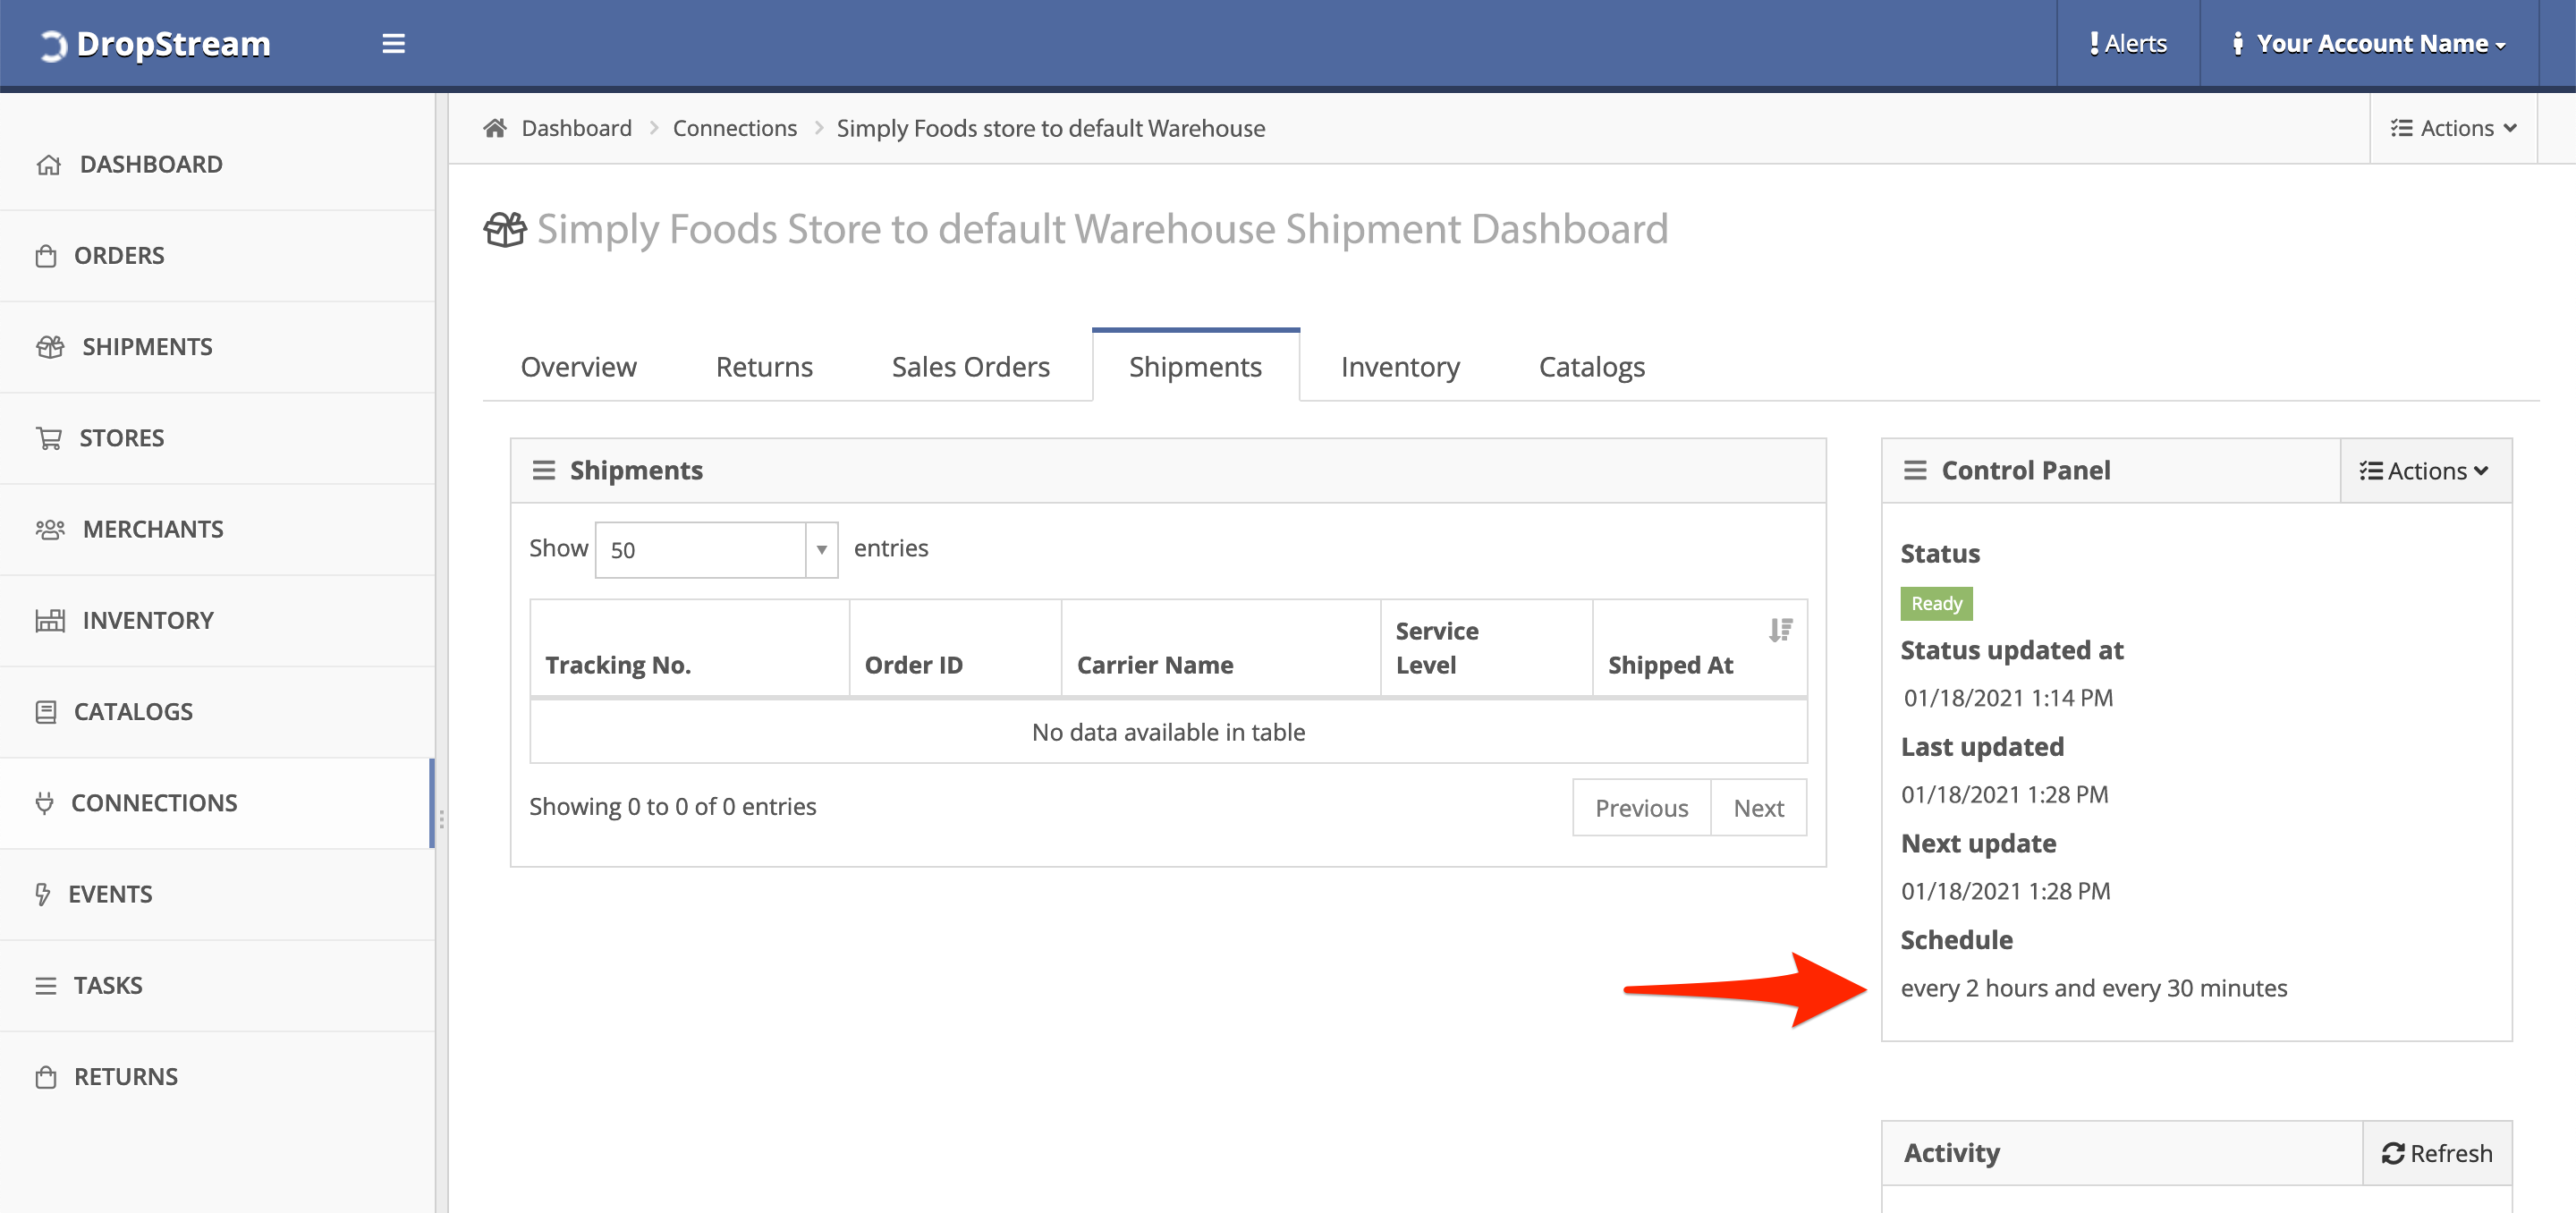 The updated schedule is shown in the Control Panel of the Shipments Dashboard.